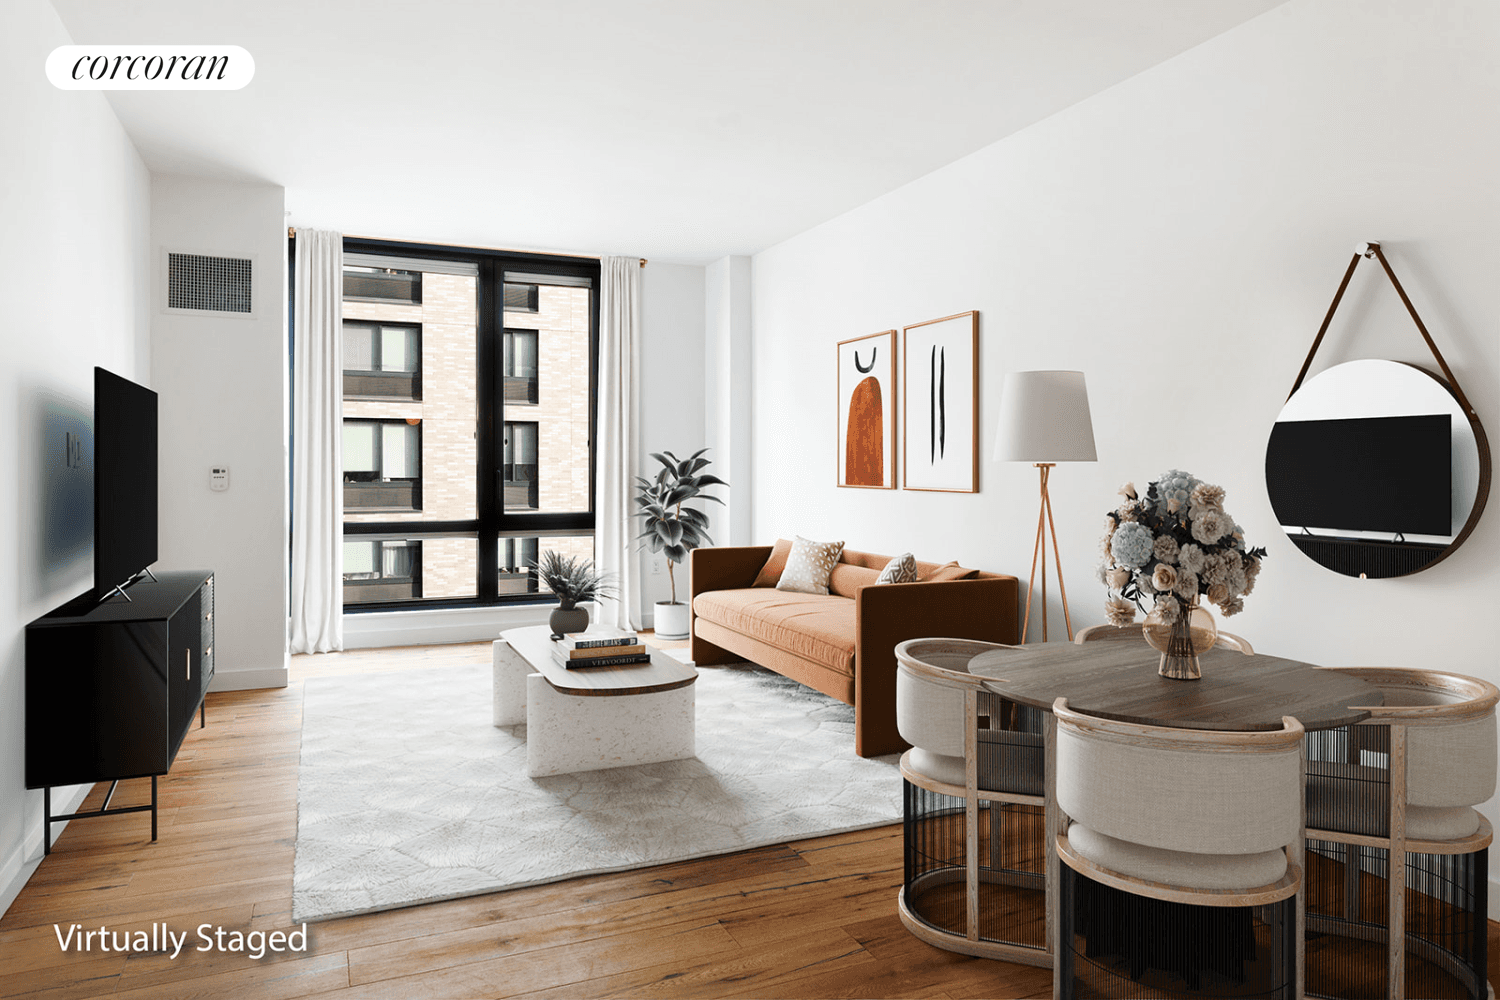 23 West 116th Street, 5D qualifies for some incredibly low mortgage rates and only 5 down.